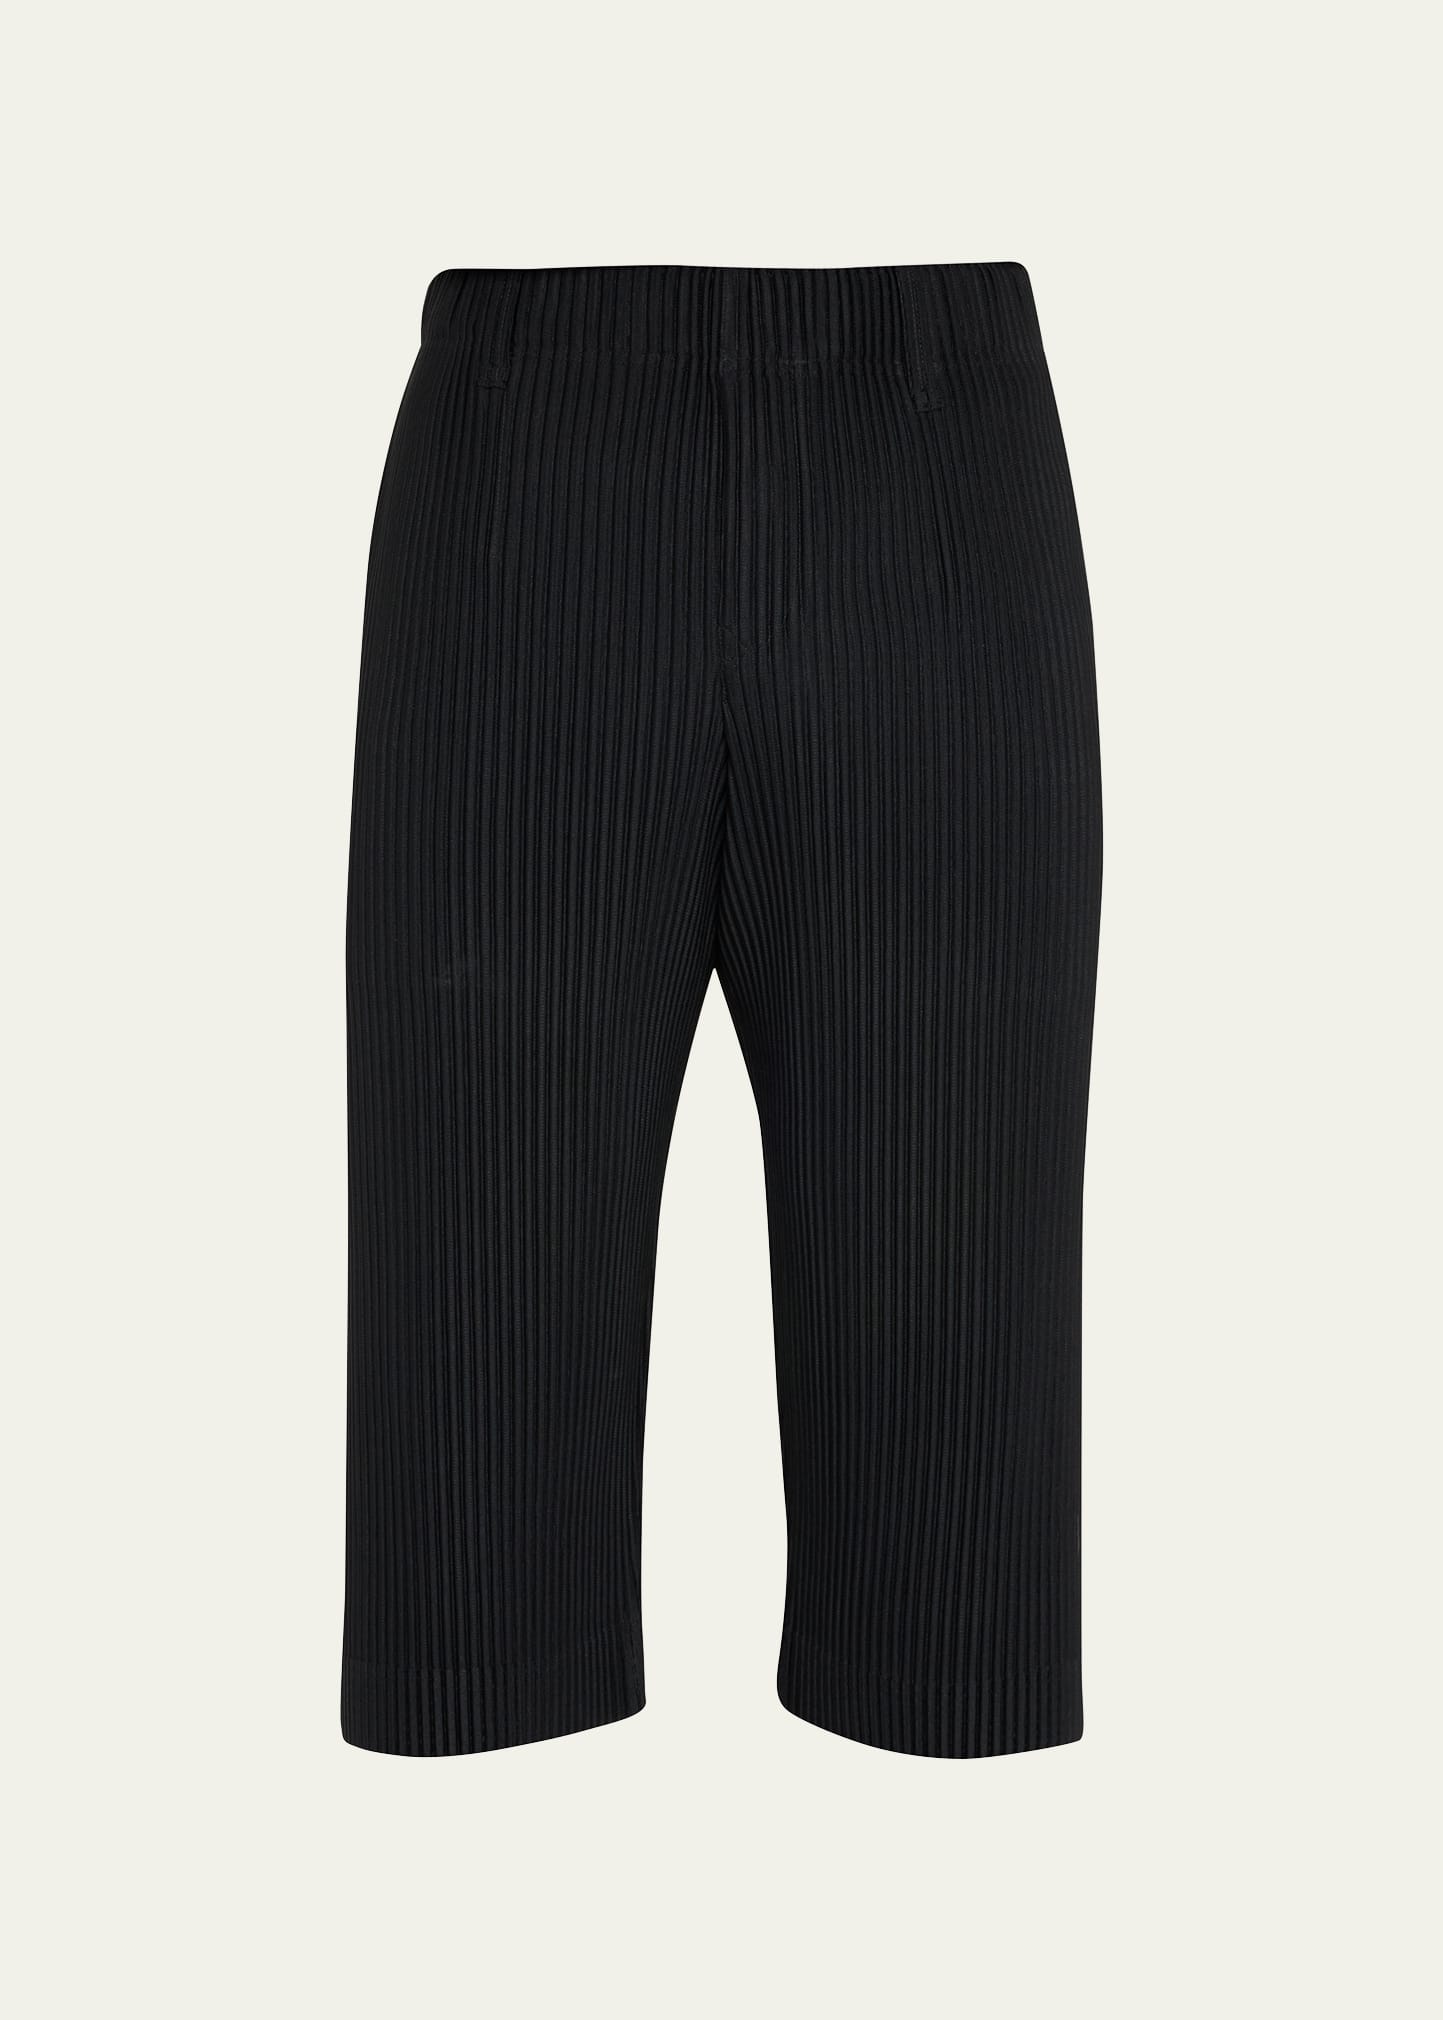 Issey Miyake Men's Long Pleated Shorts In Black